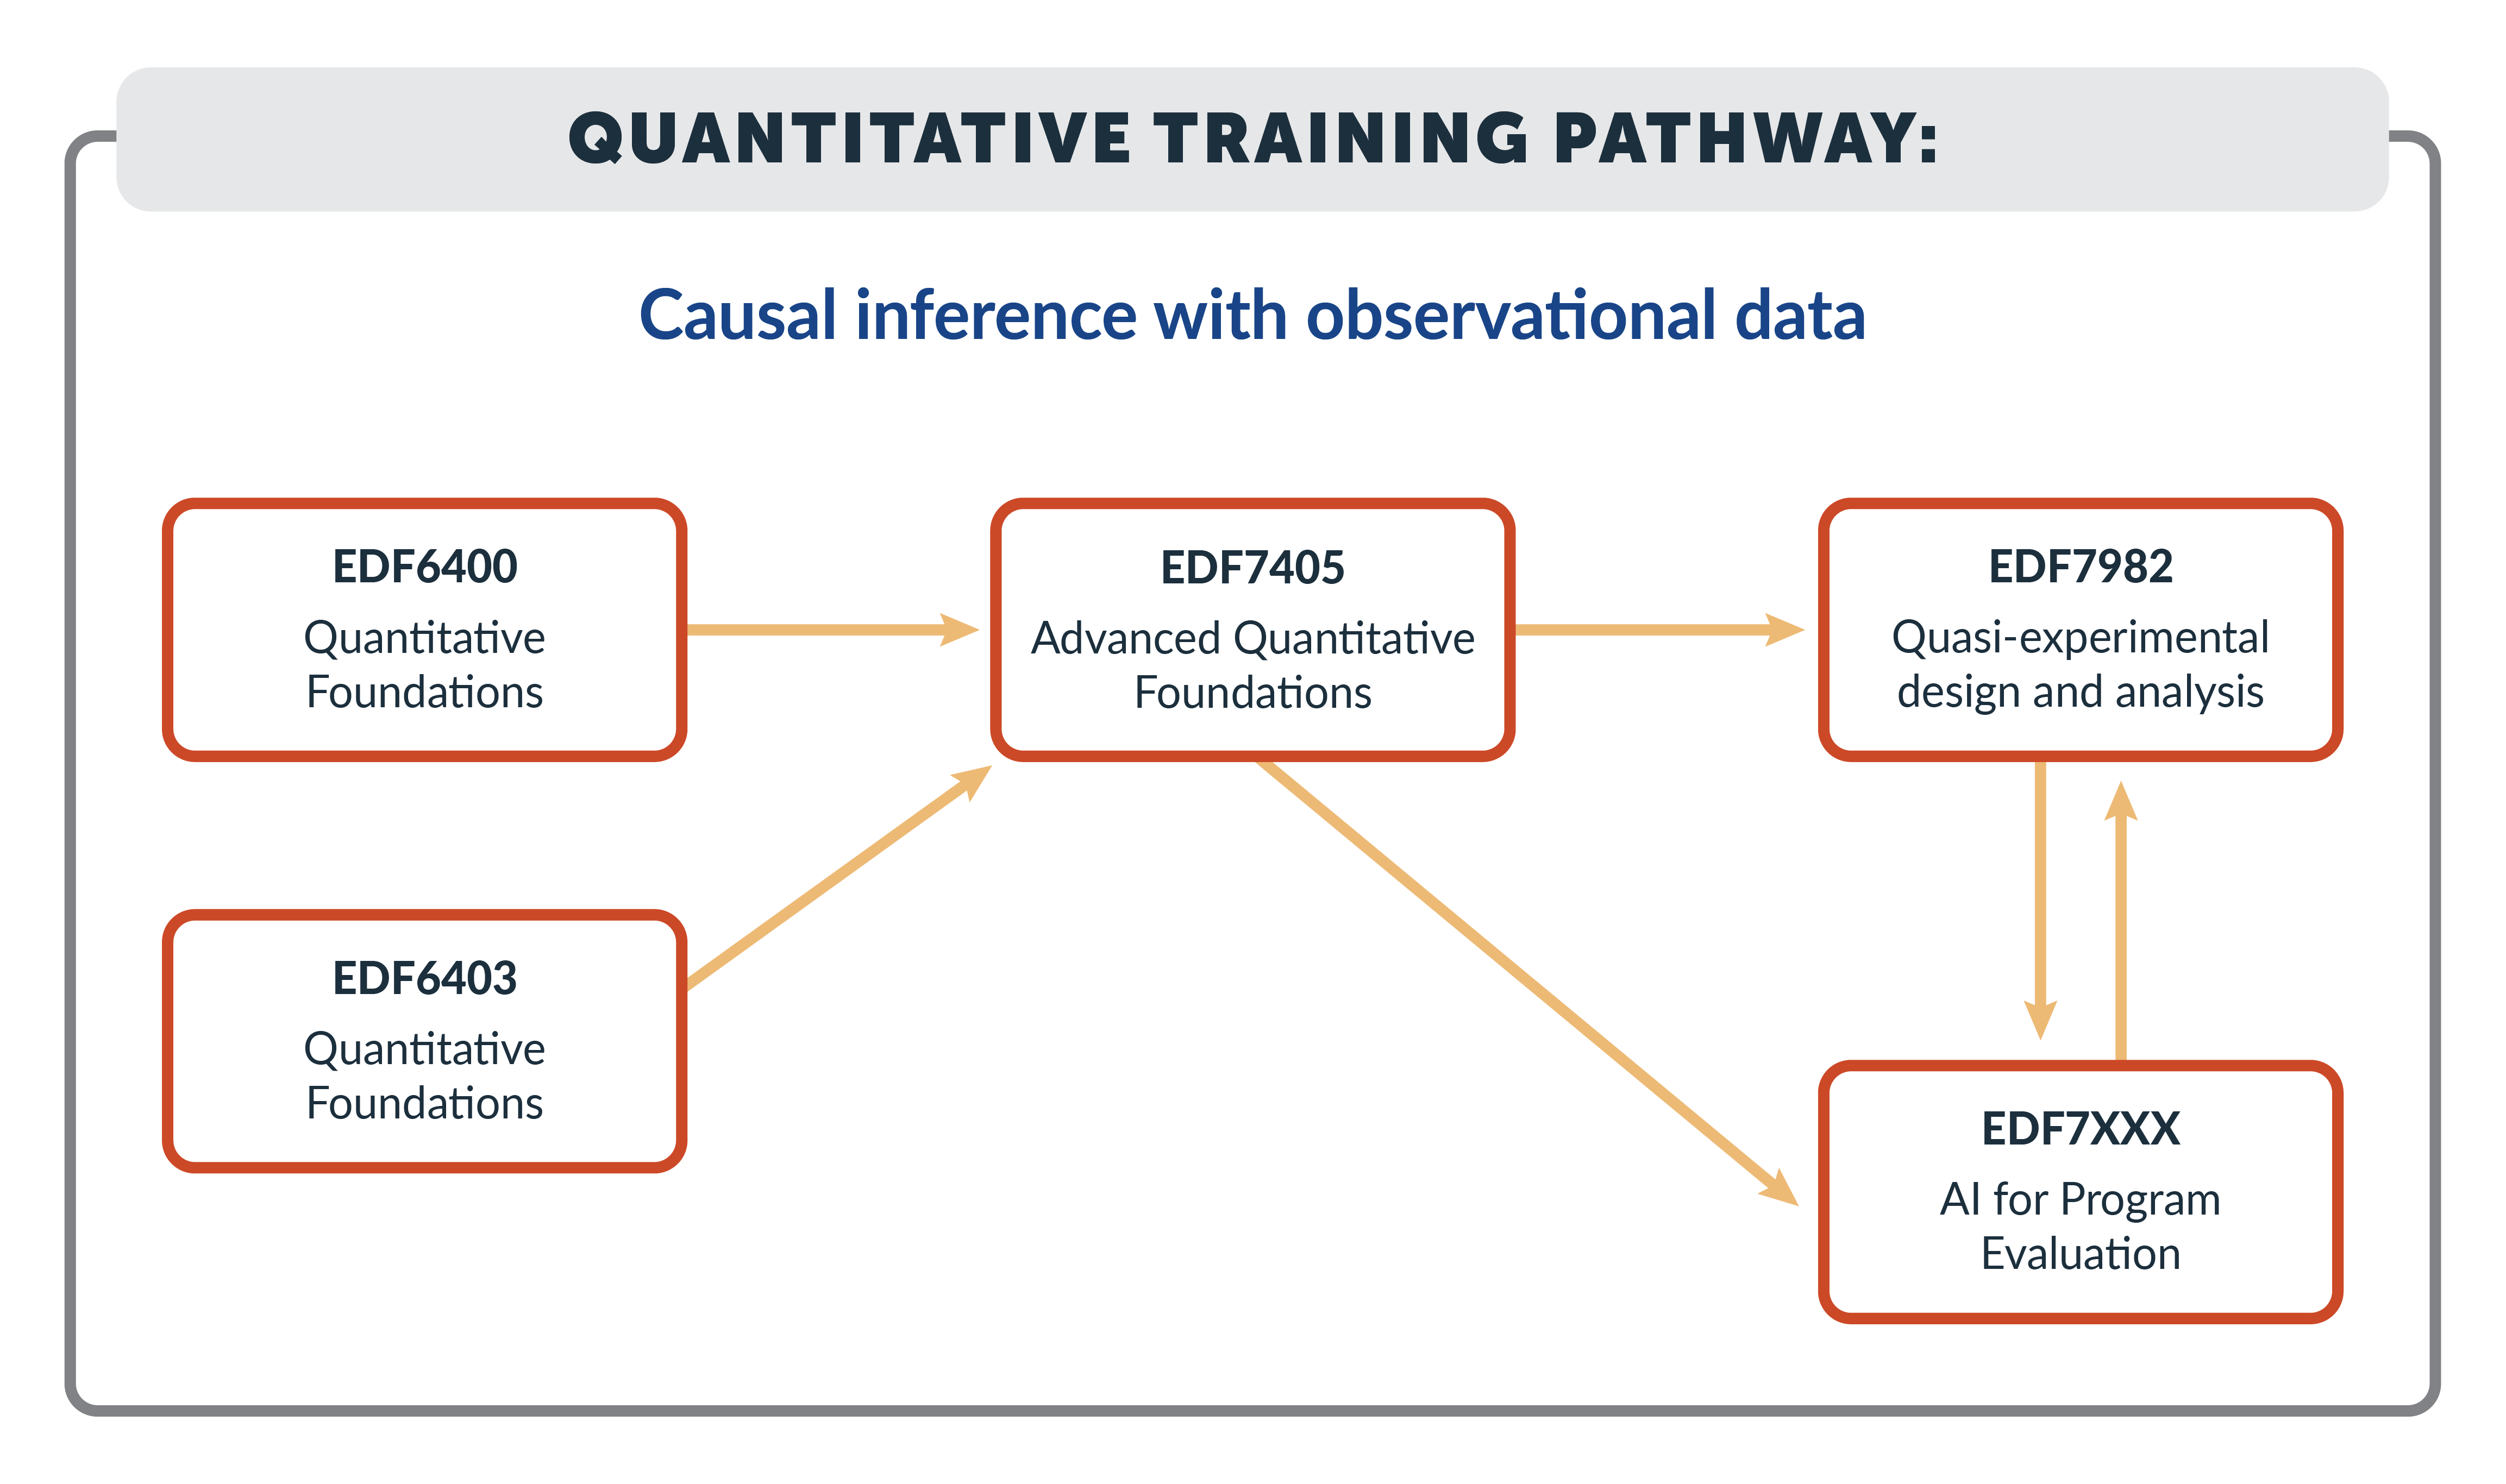 Quantitative Training Pathway - Casual Inference with Observational Data